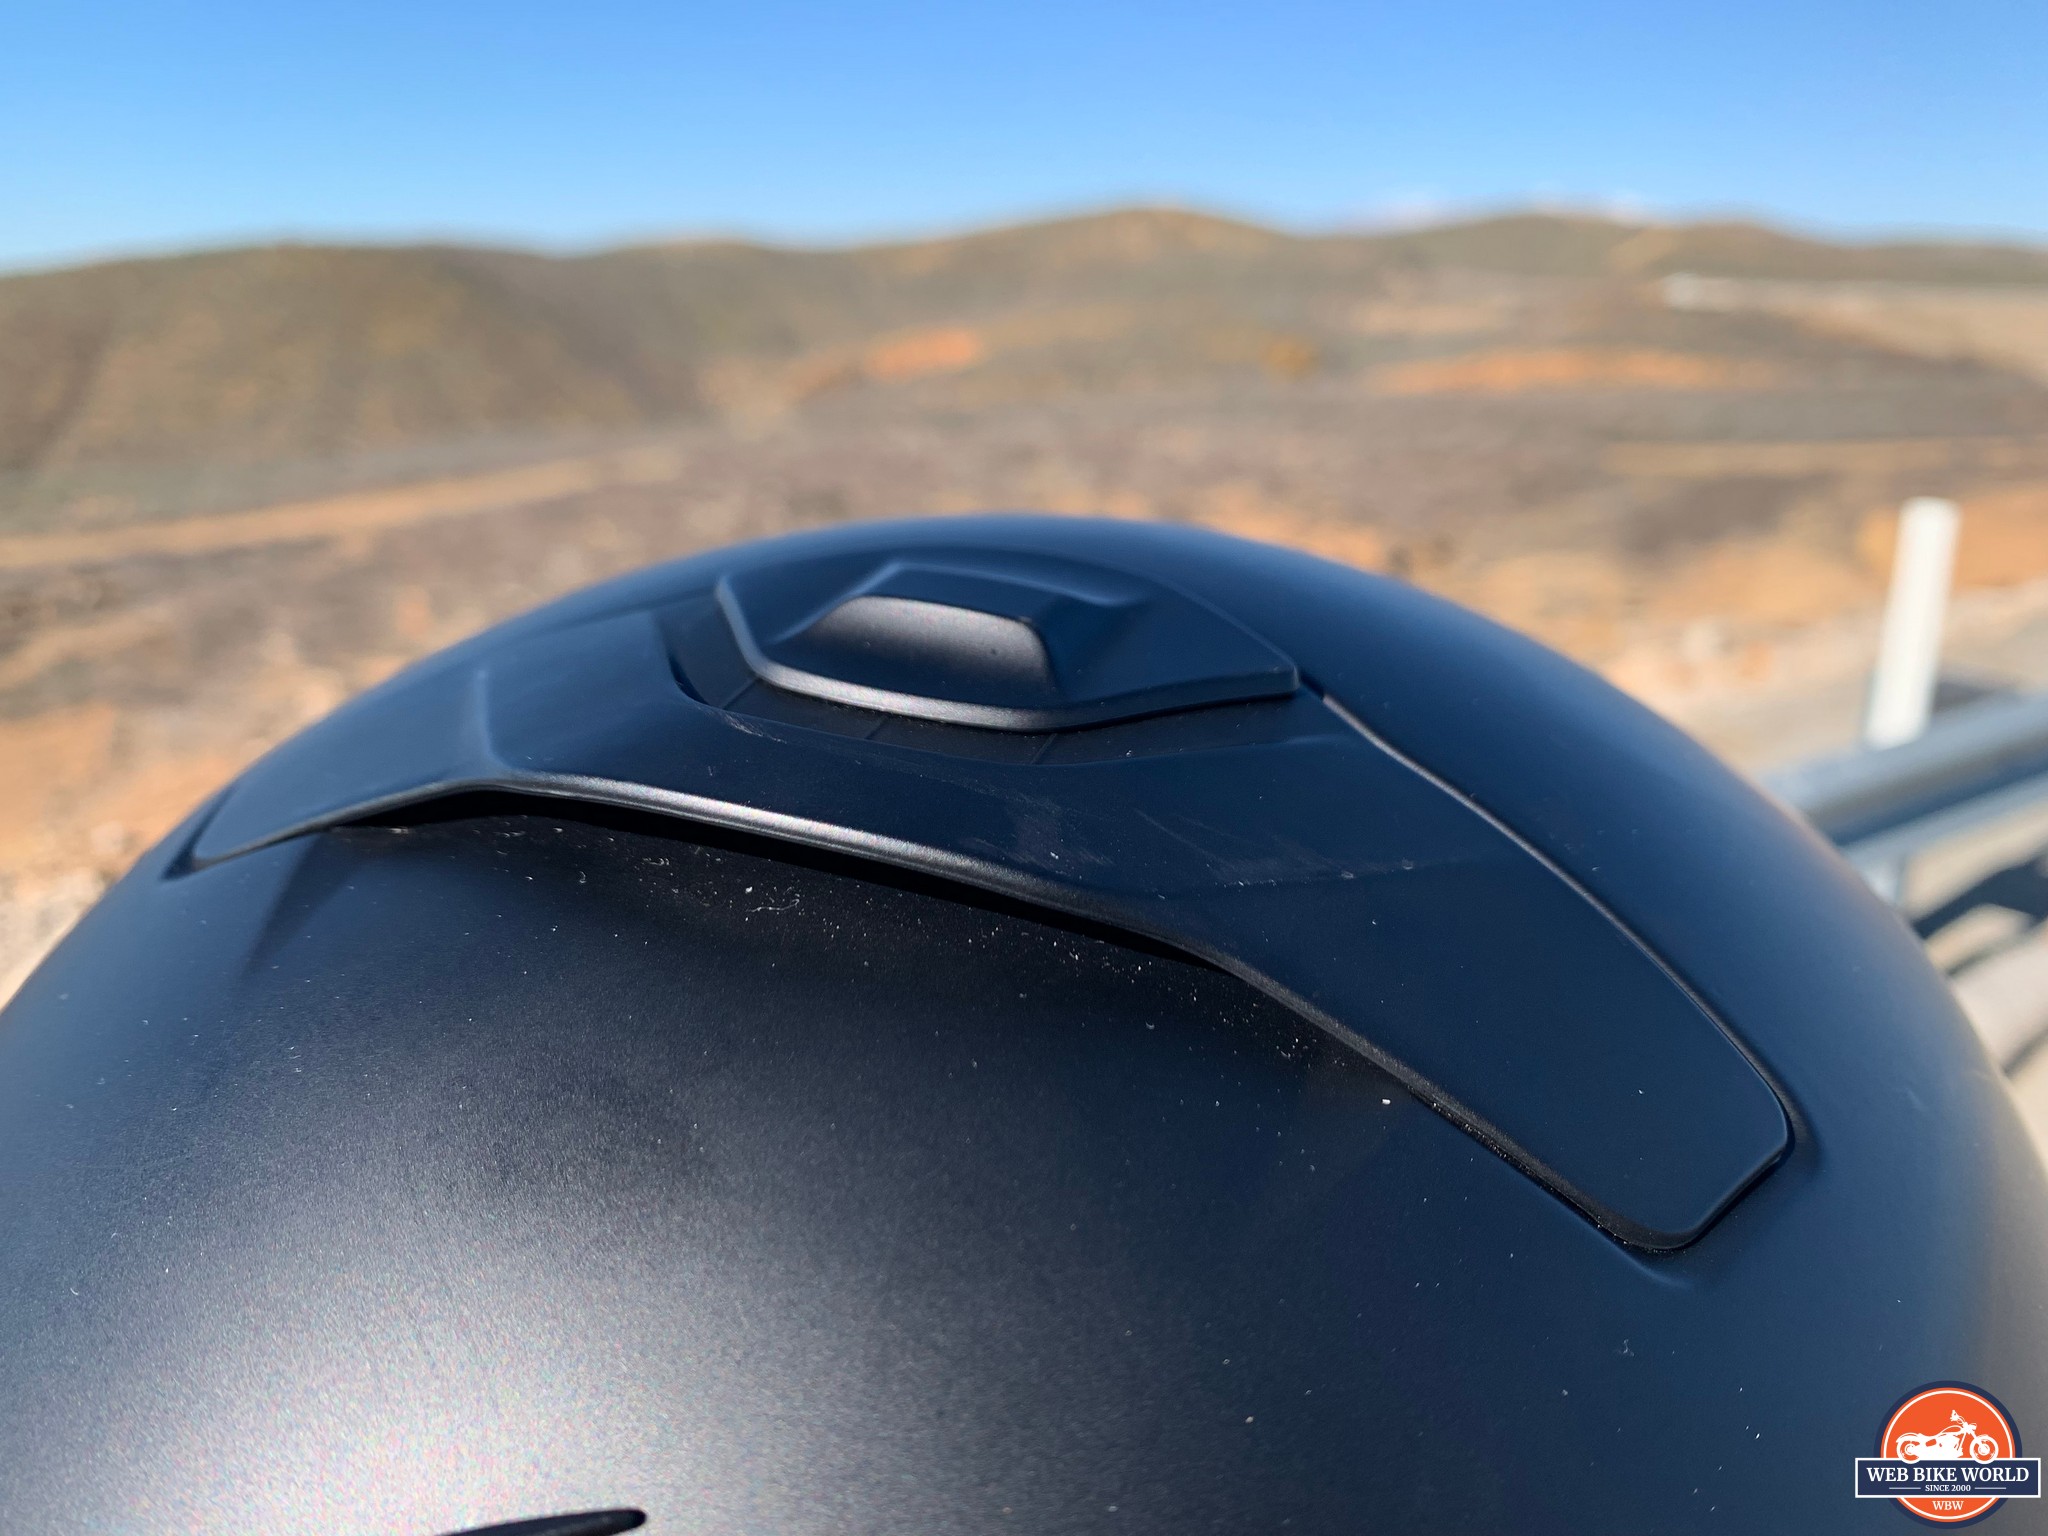 Single crown vent on the top of the EXO GT930 helmet